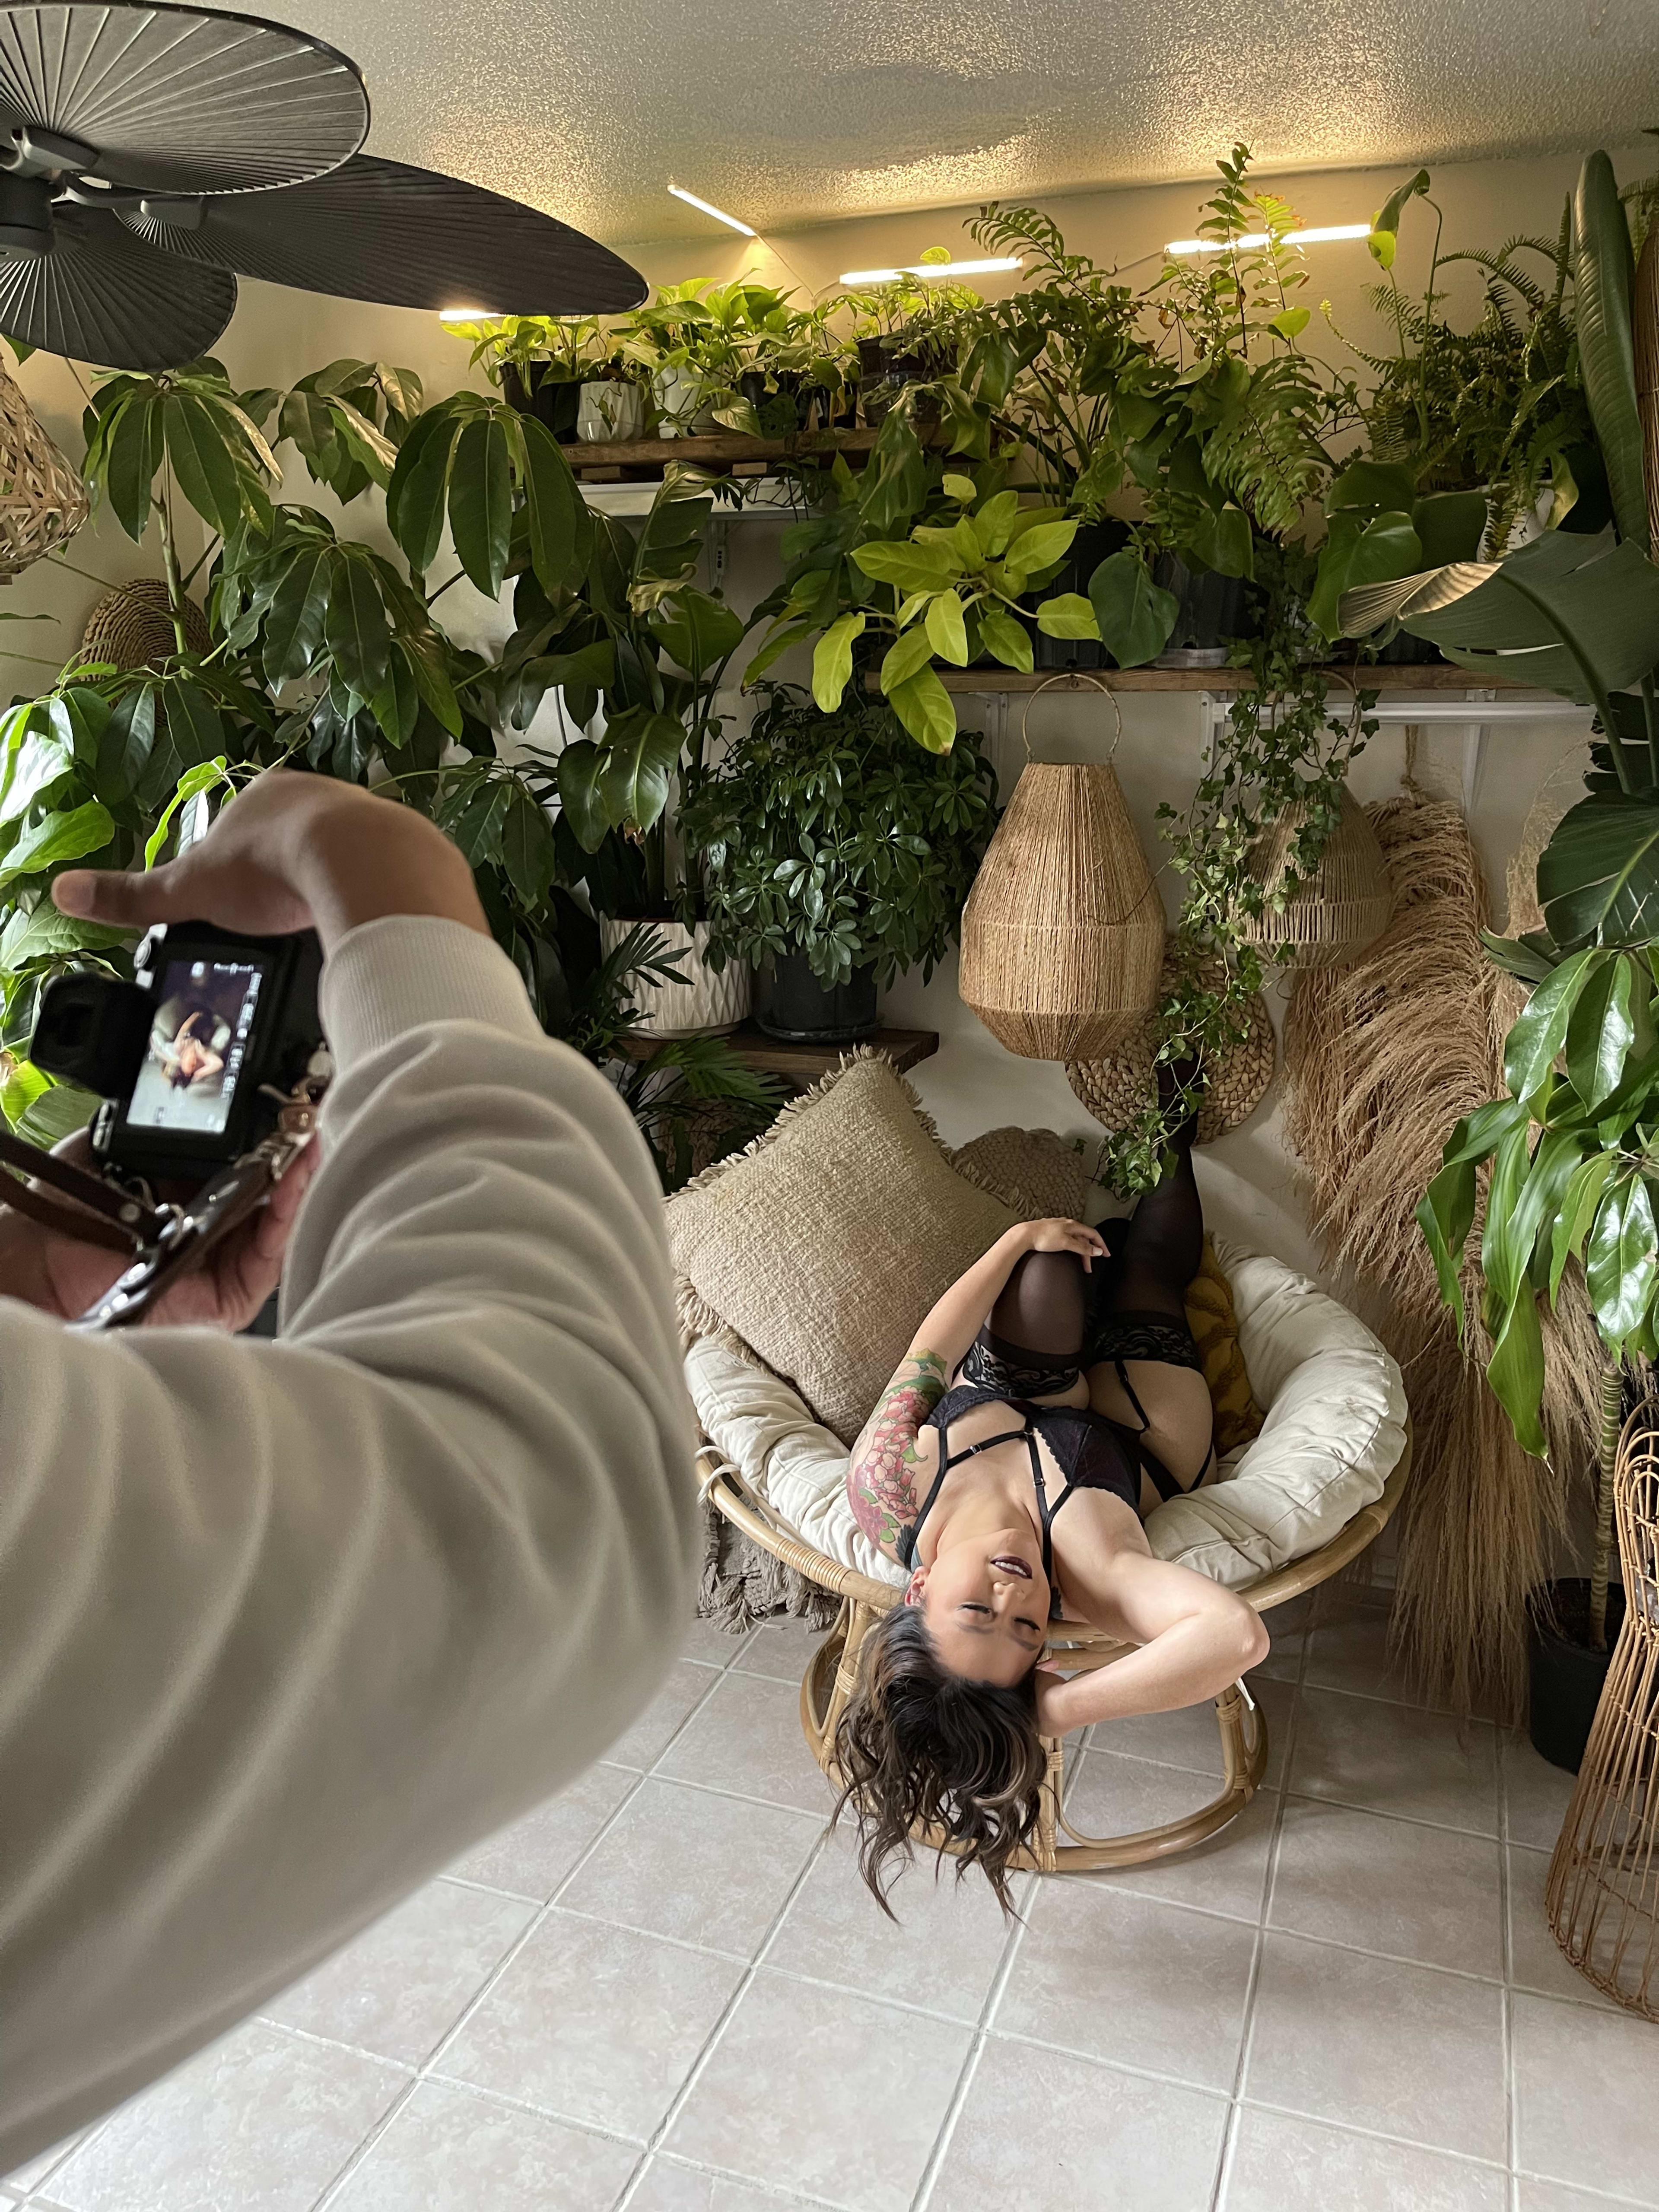 A woman is posing for a photoshoot in front of a green plants.